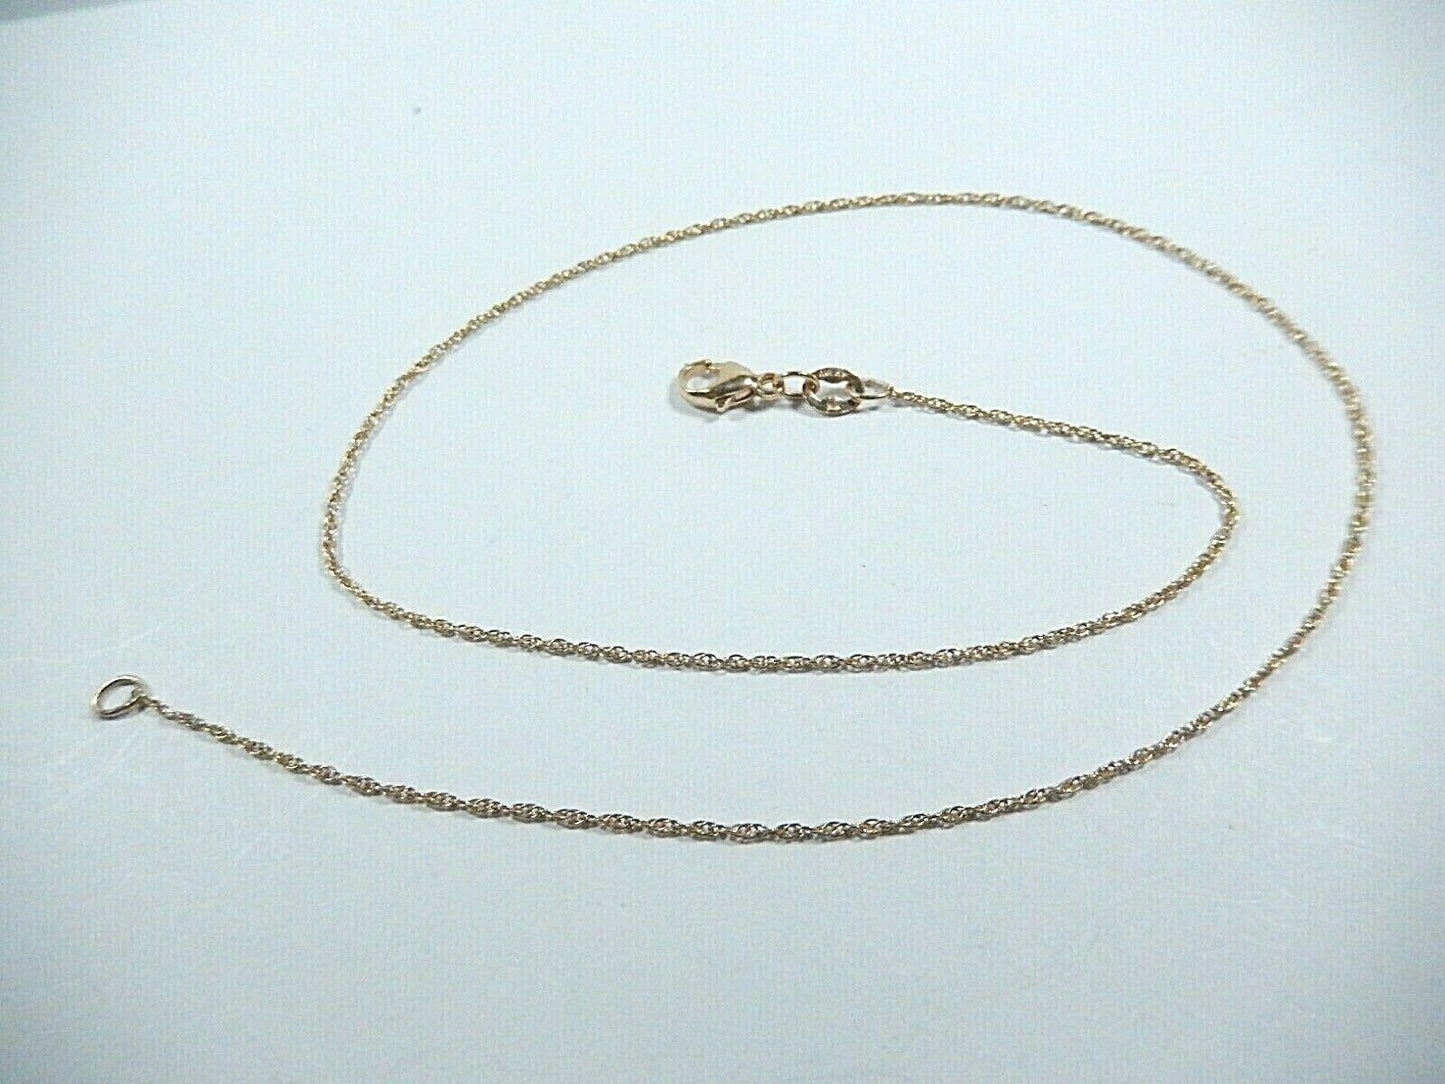 14K YELLOW GOLD JAMES AVERY 1.86 MM  LIGHT ROPE CHAIN NECKLACE 14 INCHES LONG